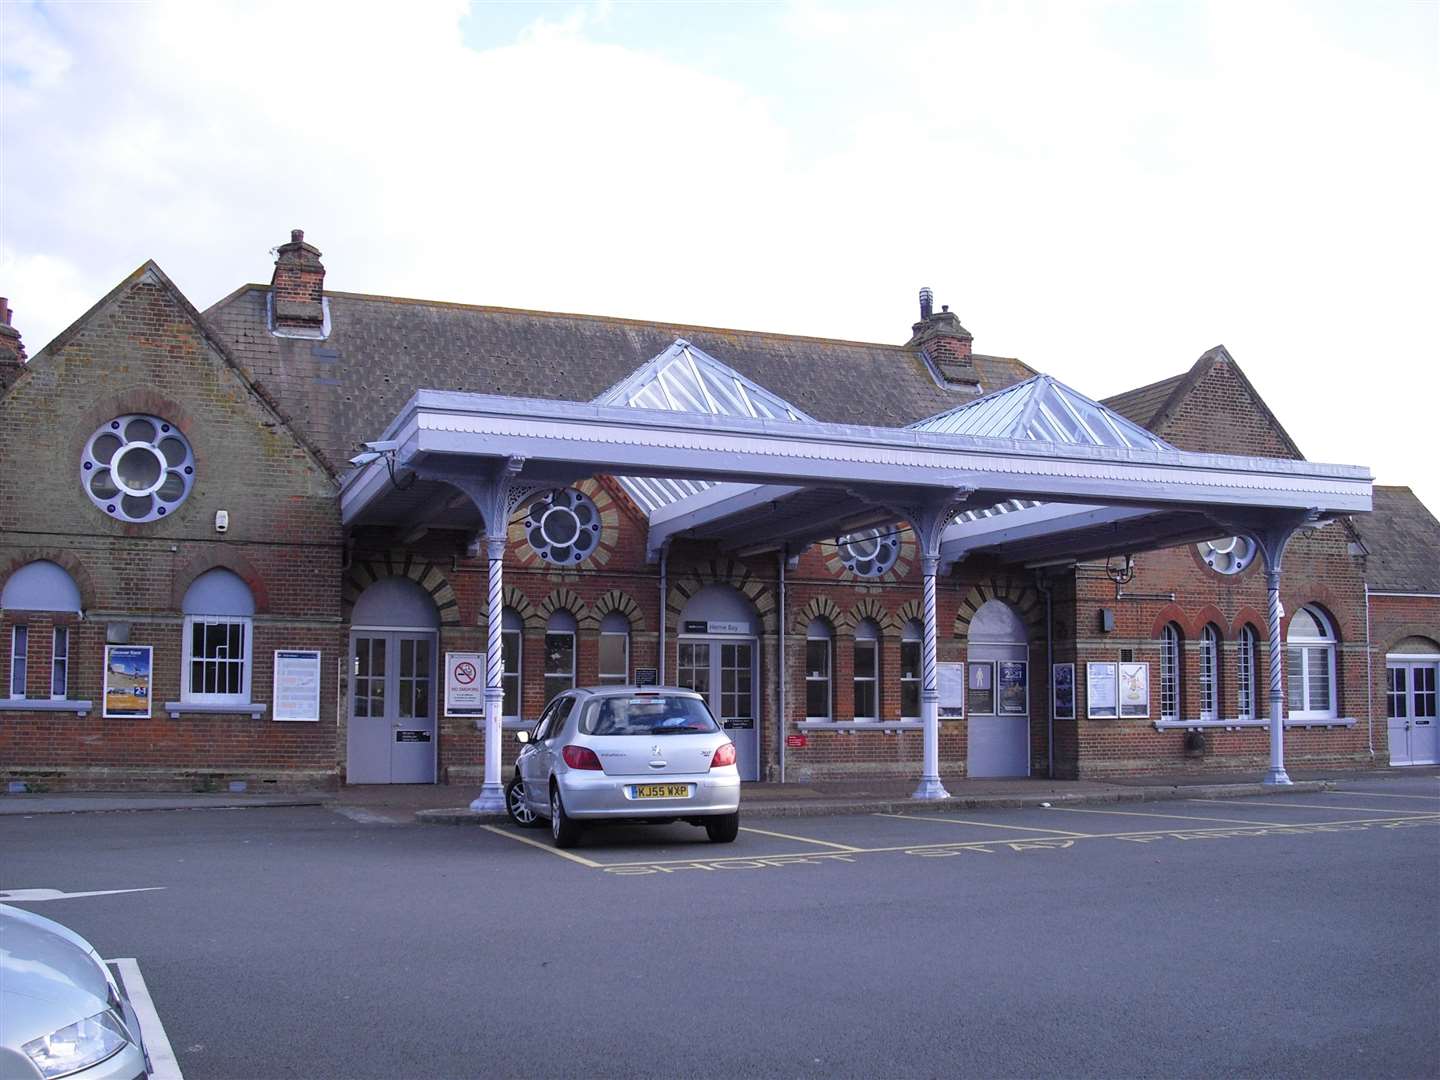 One of the incidents on Wednesday evening took place at a bus stop outside Herne Bay railway station (pictured)